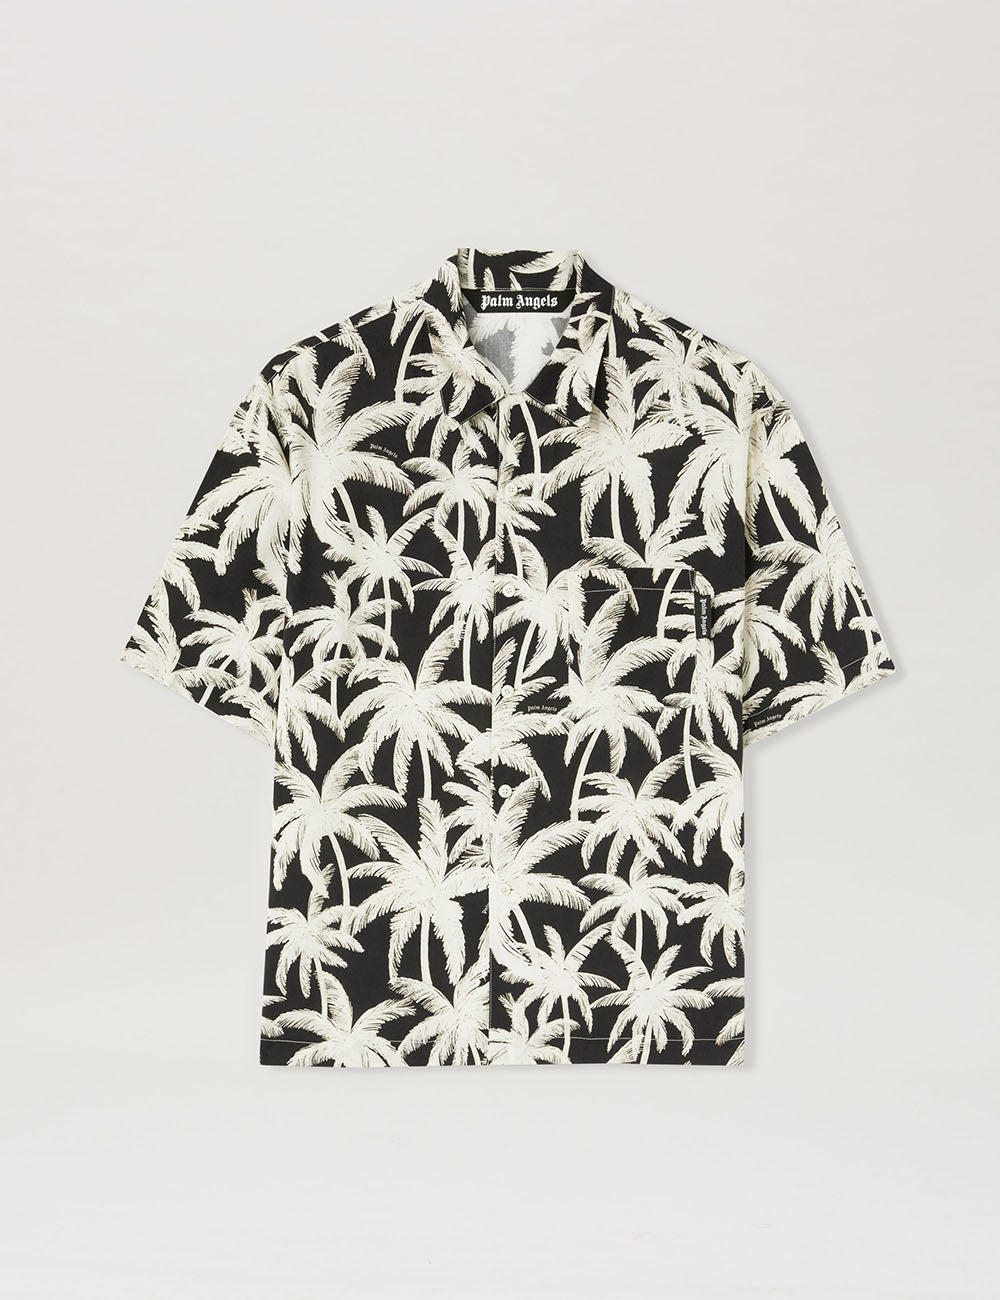 PALM ANGELS PALMS ALLOVER SHIRT L/S